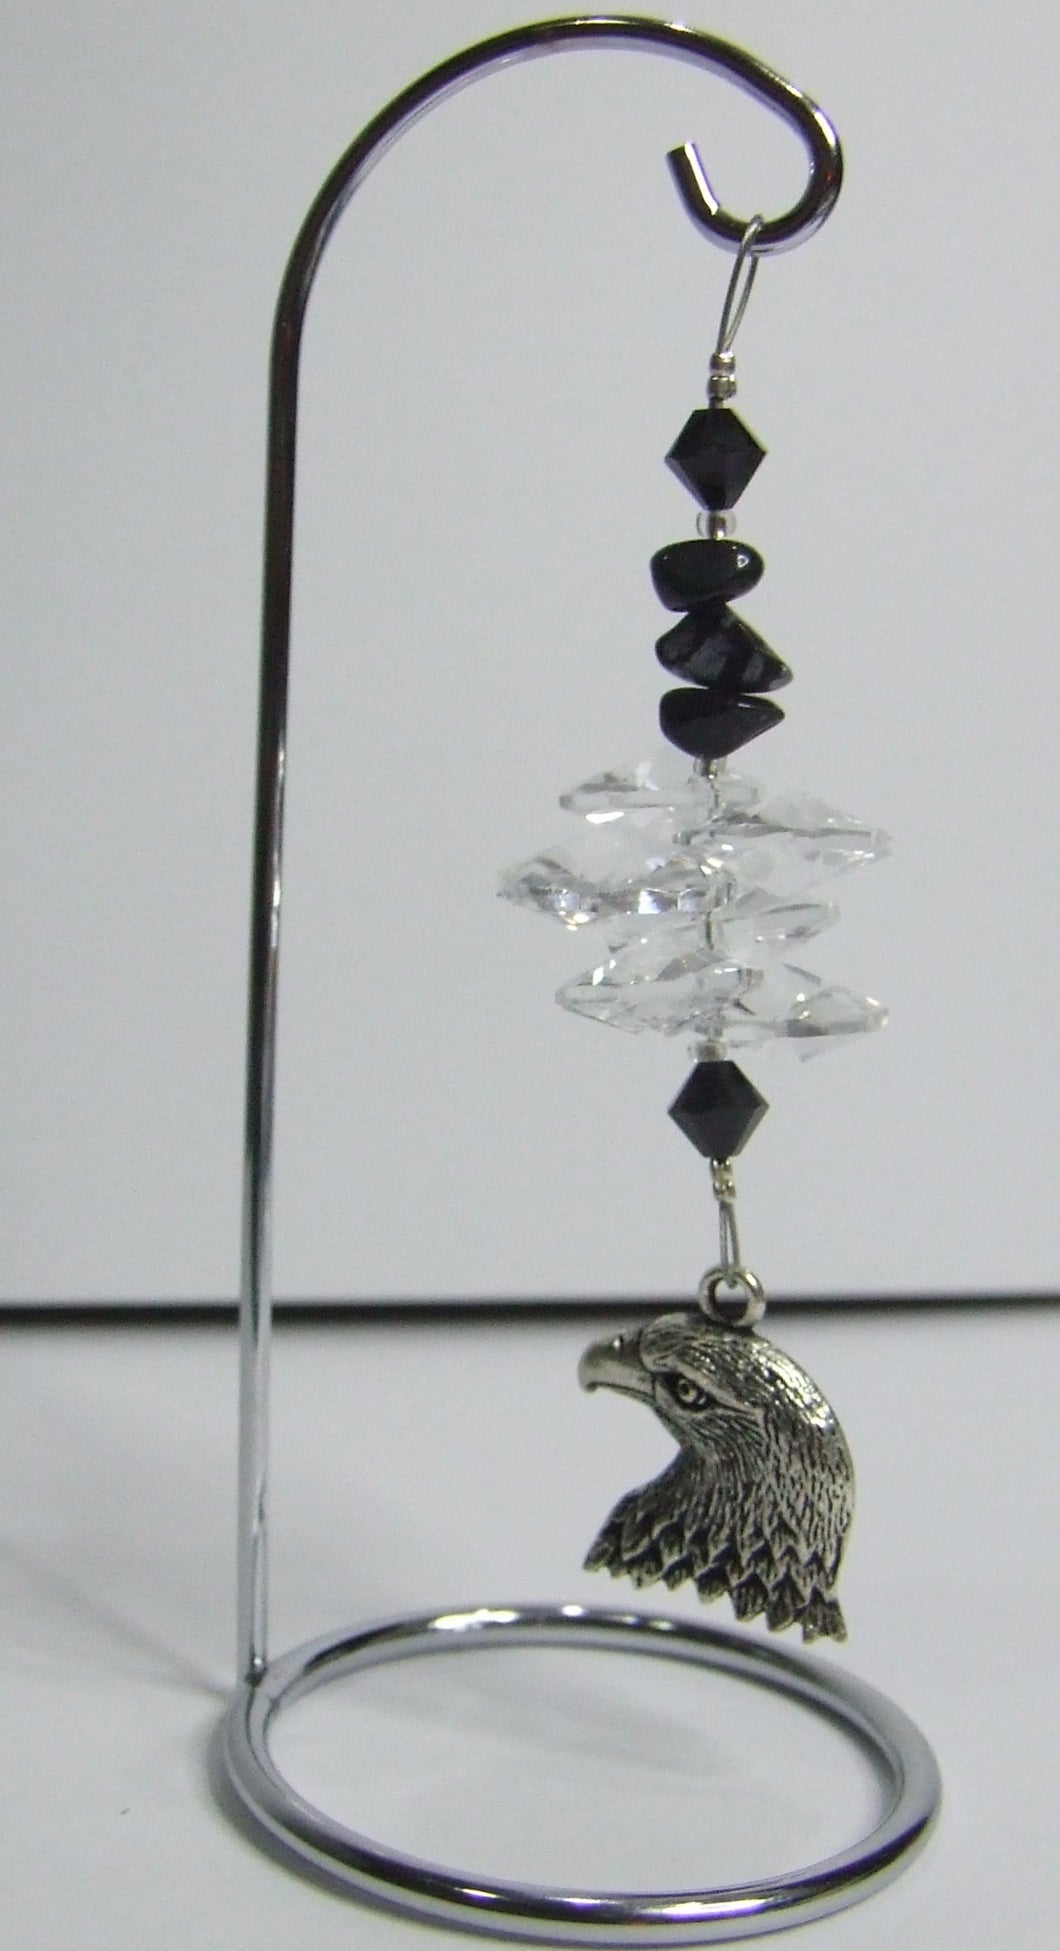 Eagle - black crystal suncatcher is decorated with snowflake obsidian gemstones and come on this amazing small stand.